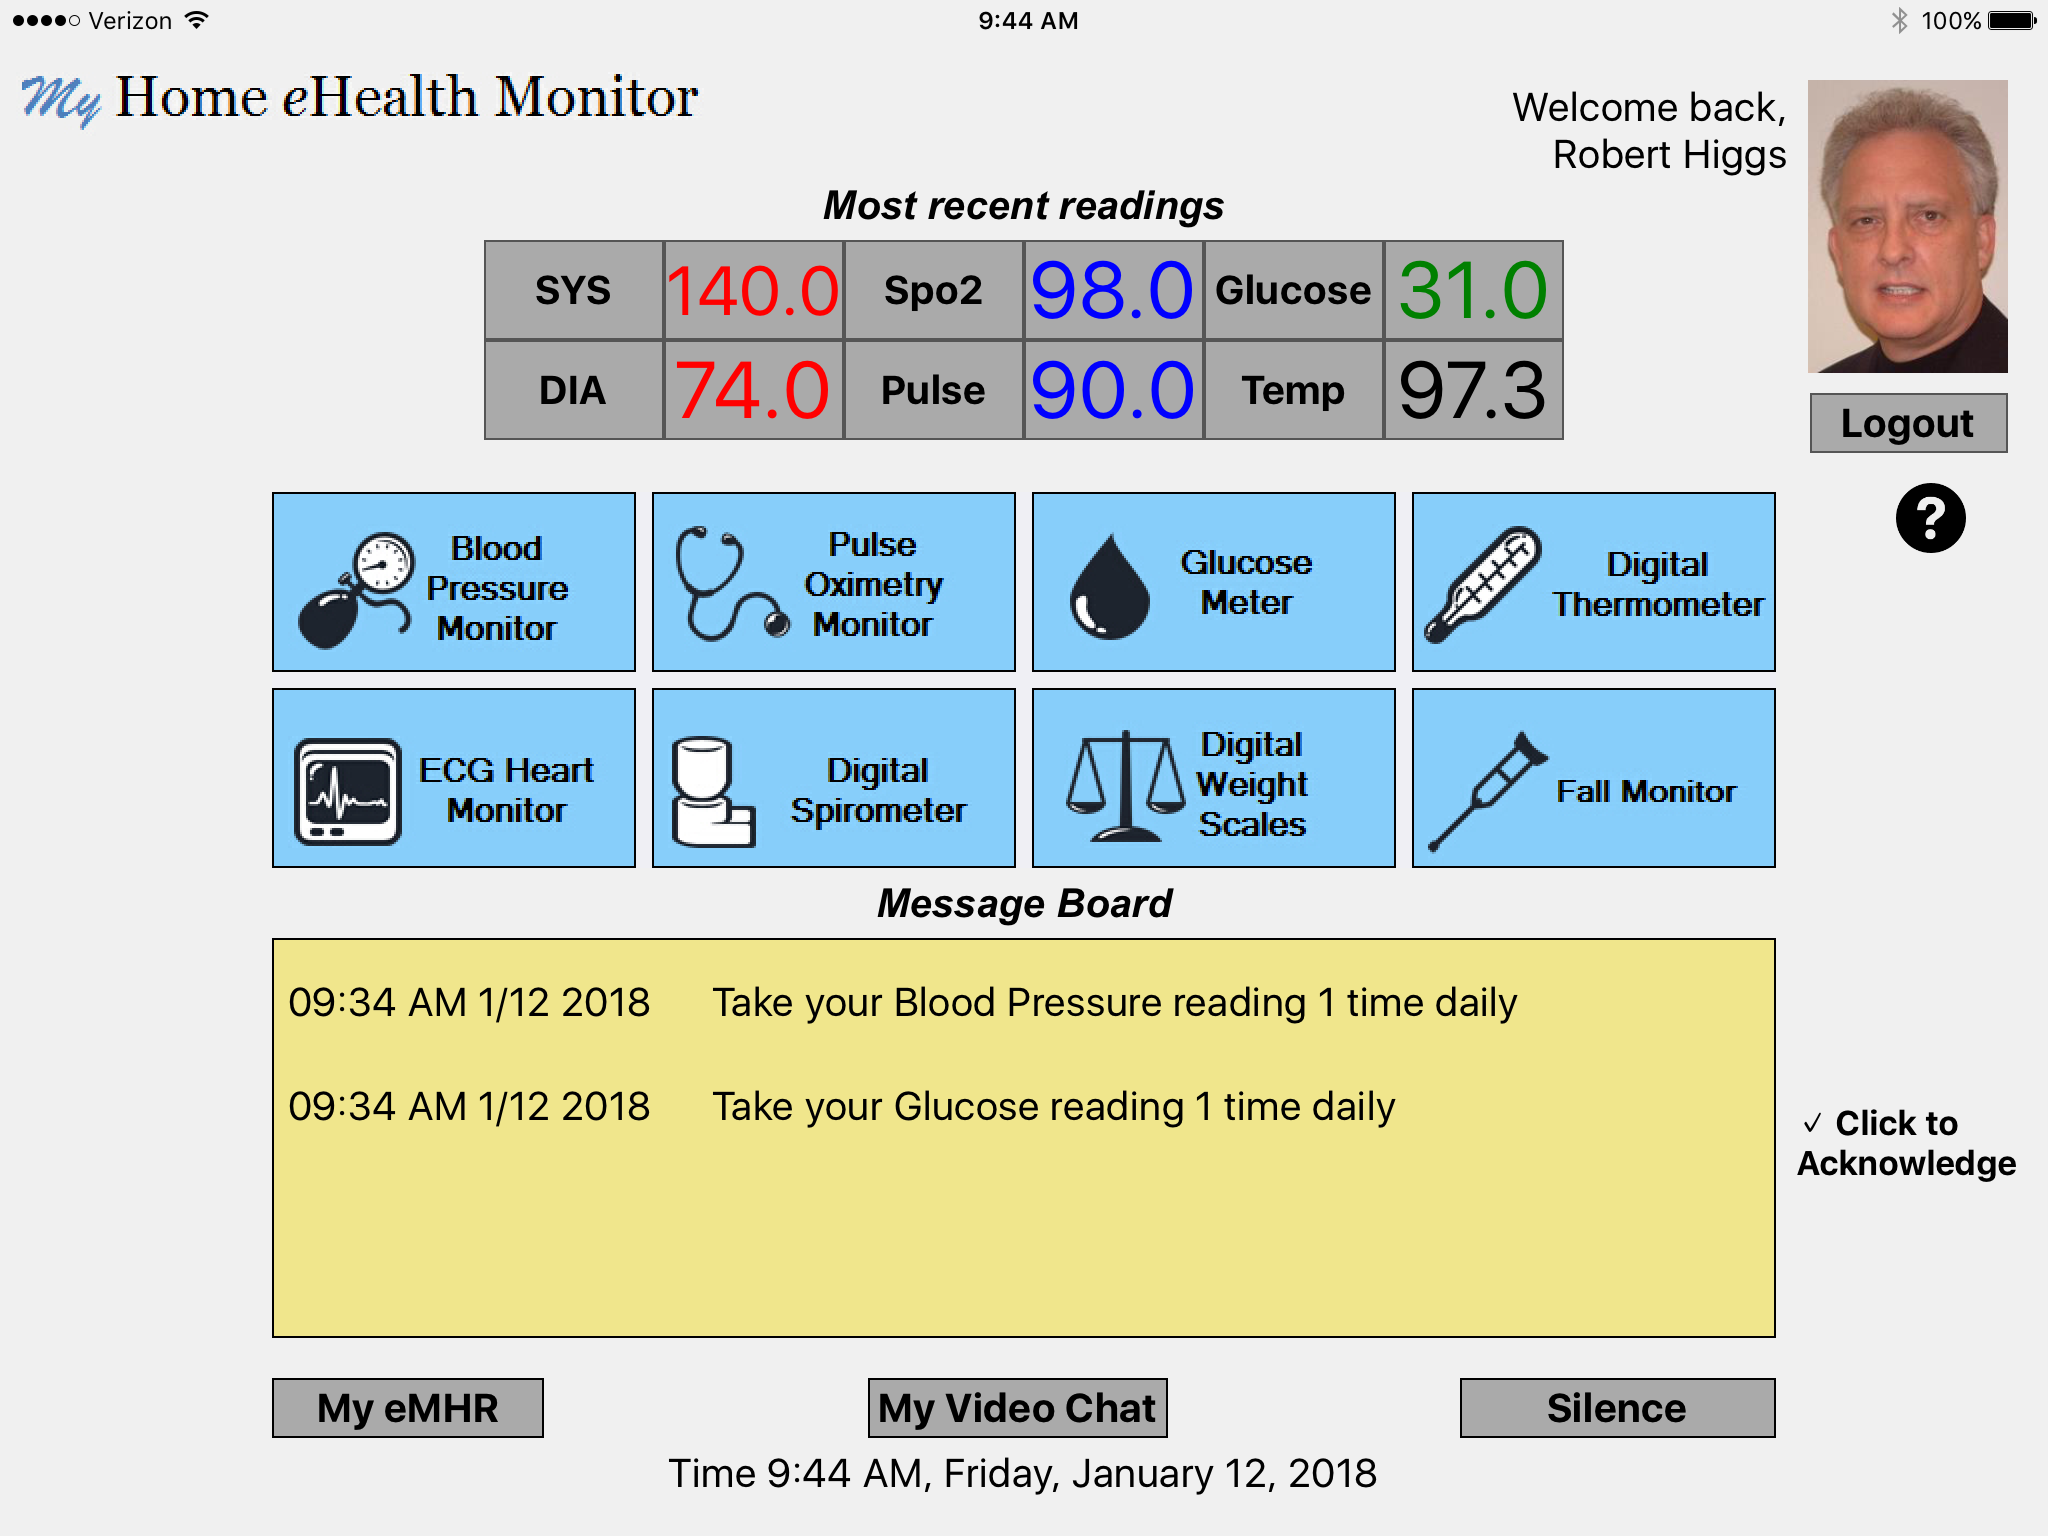 Home eHealth App & Devices